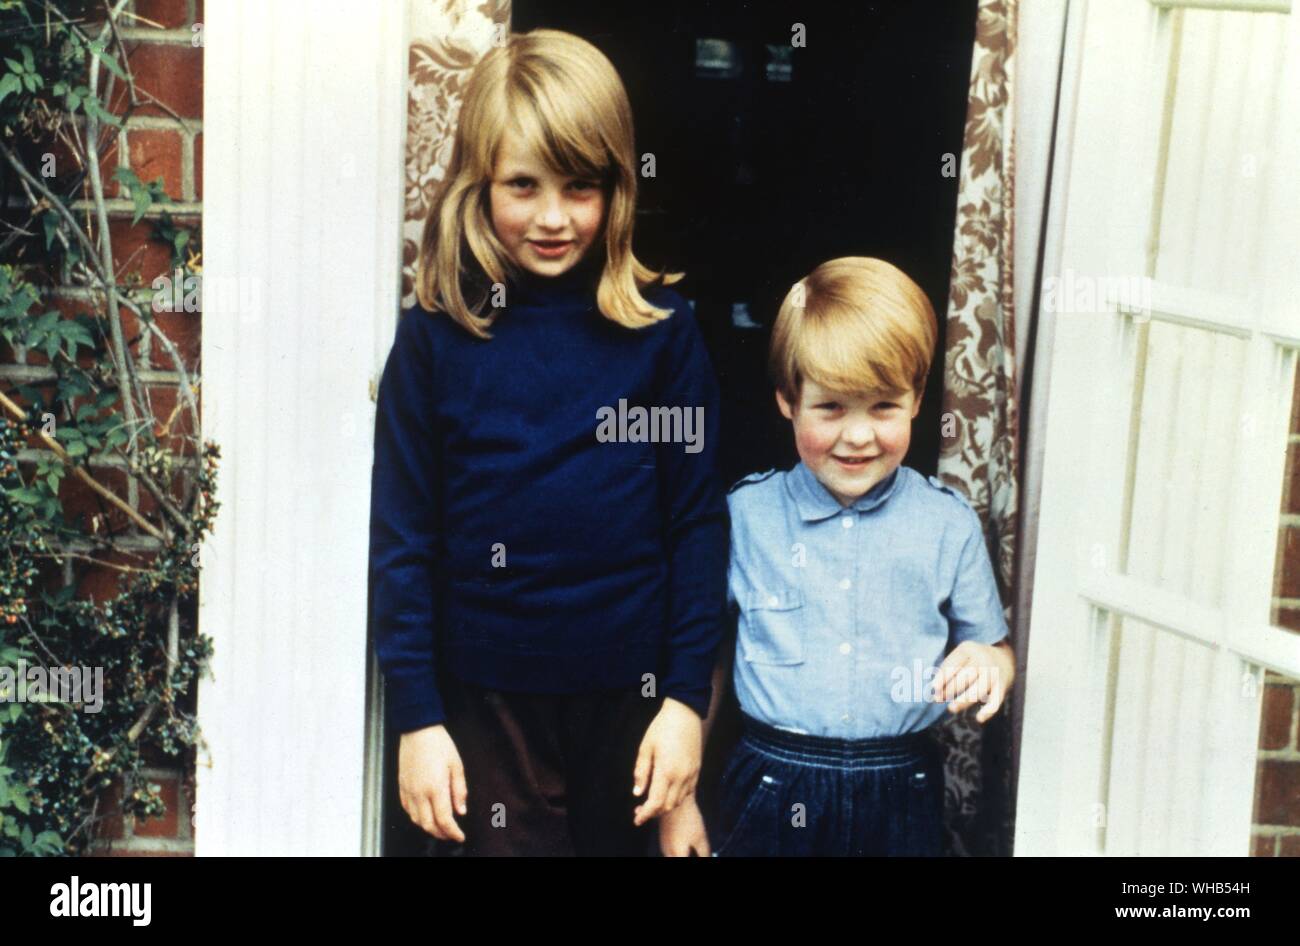 Diana Frances Spencer with her brother Charles. Born 1 July 1961 at Sandringham. Became Lady Diana Spencer in 1975. Engaged to Prince Charles 24 February 1981. Married to Prince Charles 29 July 1981. Separated from Charles 9 December 1992. Divorced 28 August 1996. Died 31 August 1997 in Paris. Stock Photo